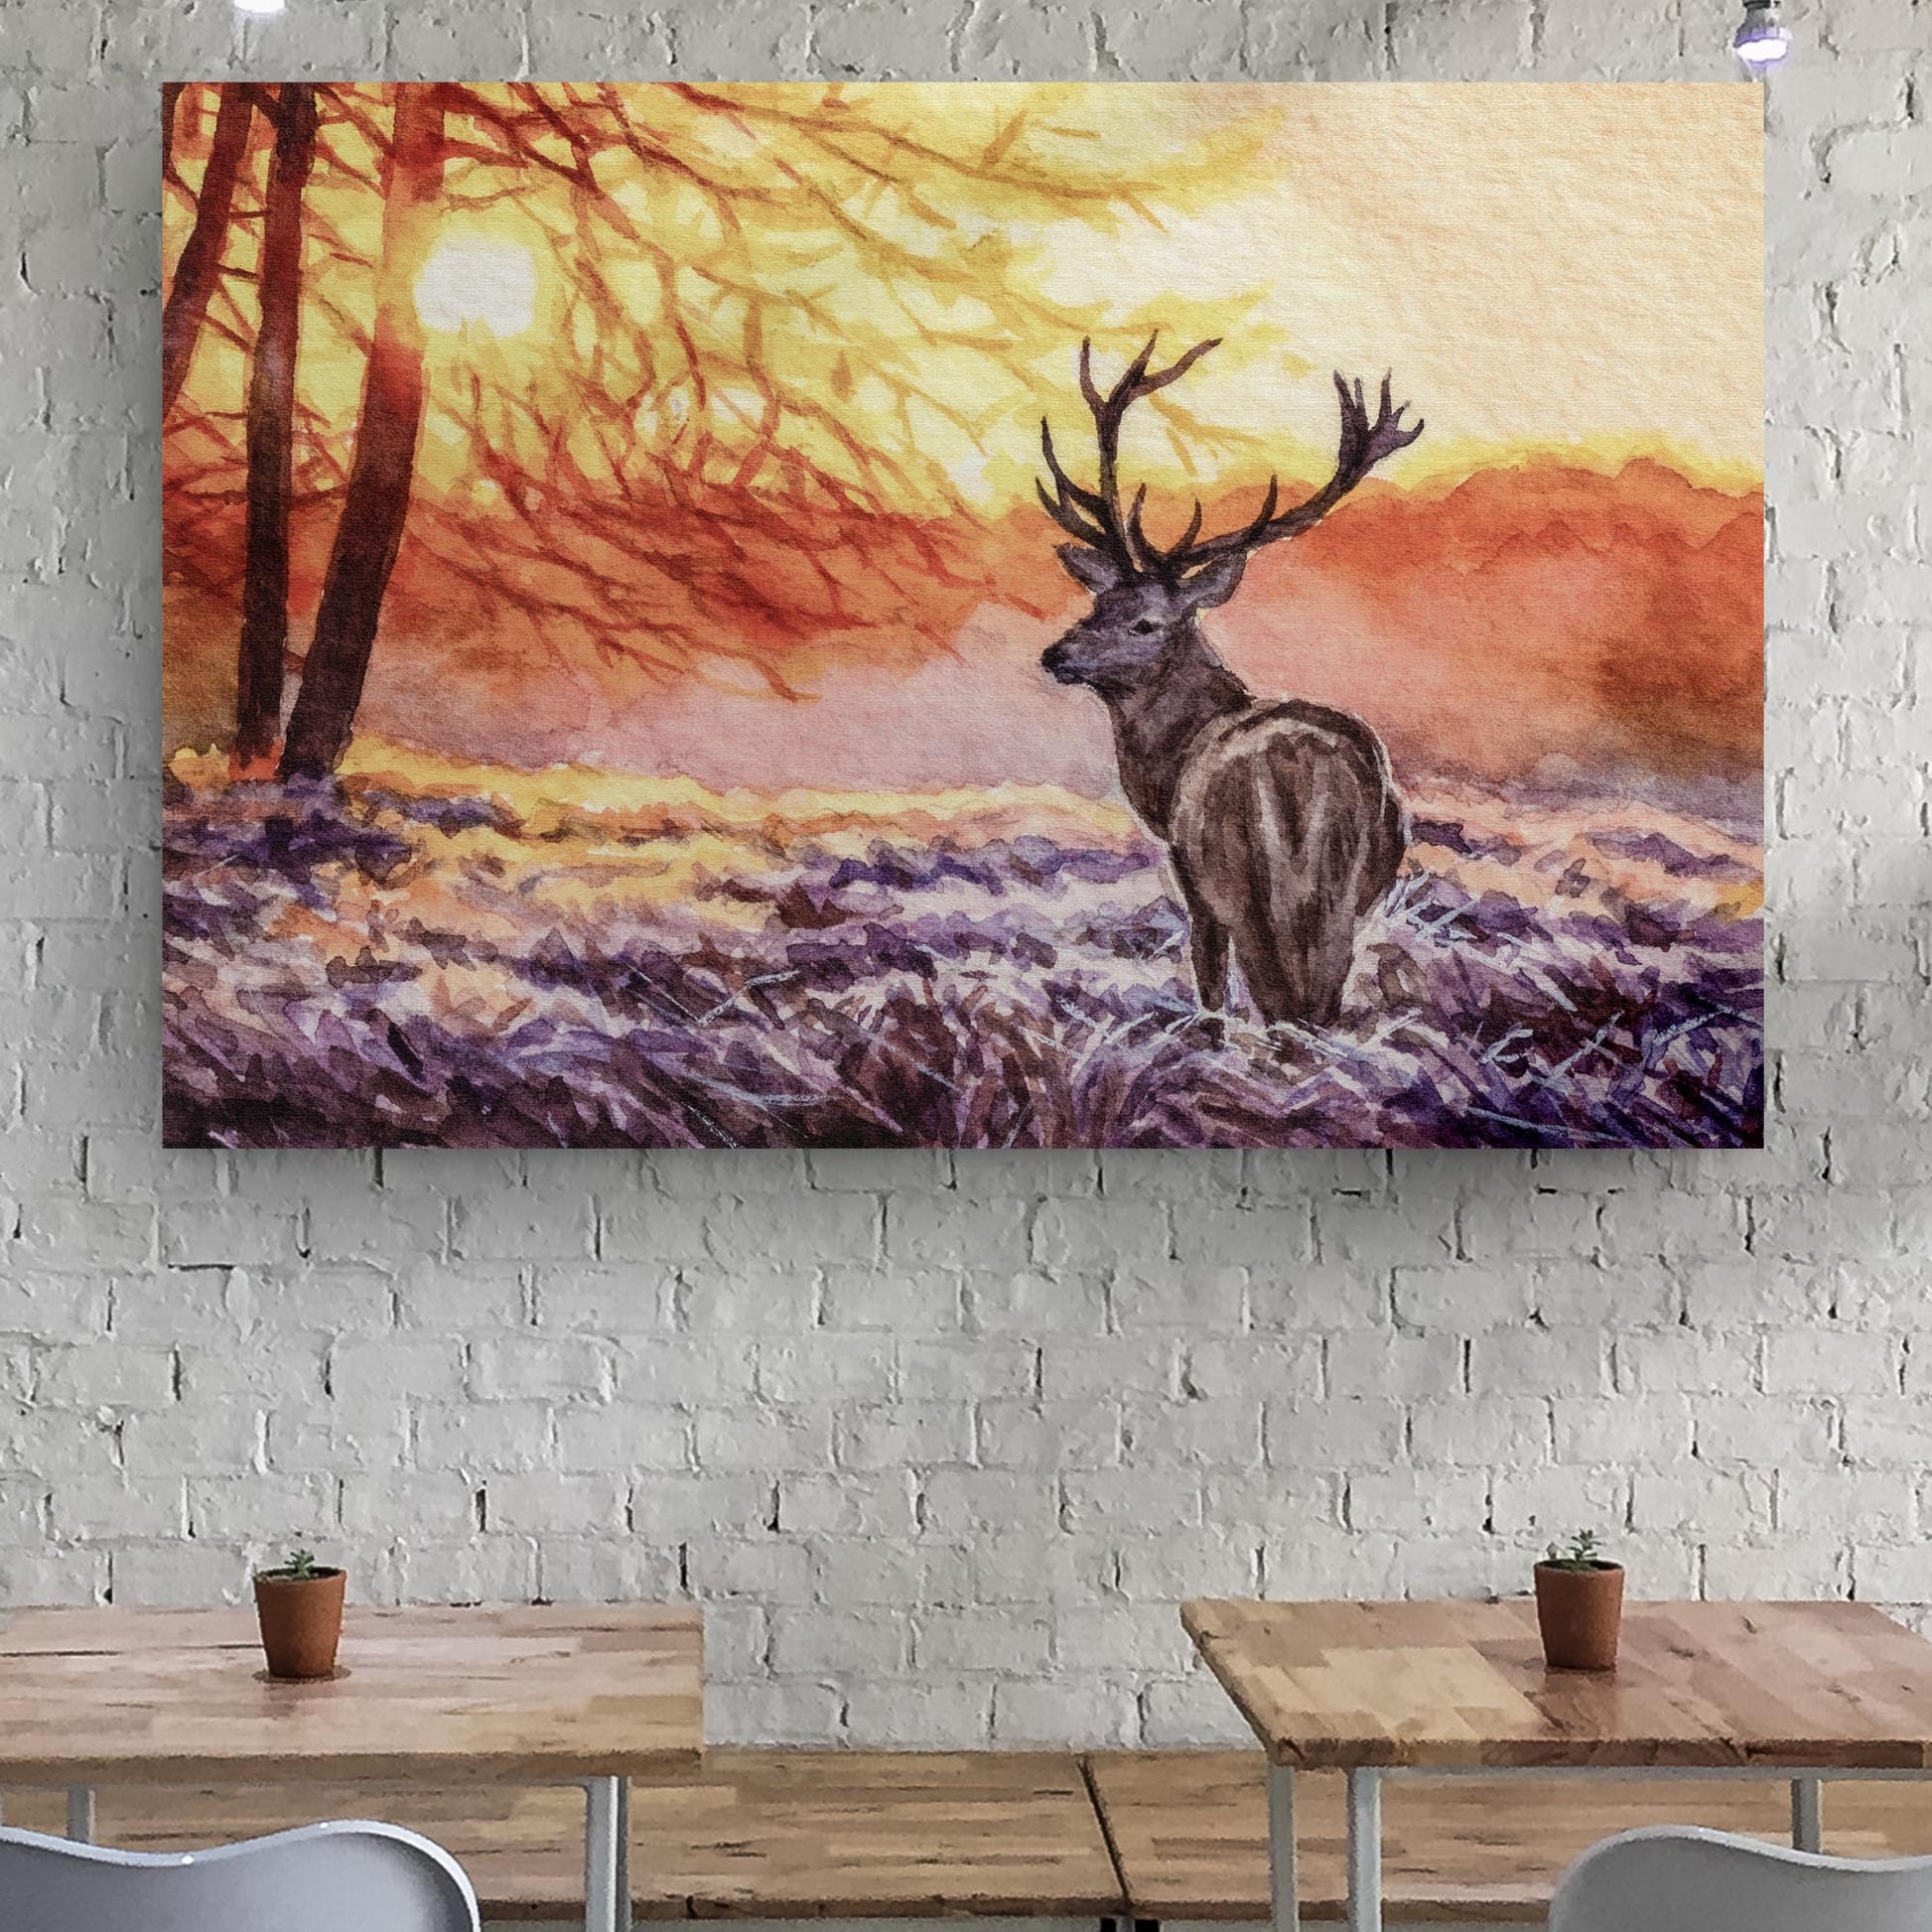 Majestic Deer At Sunset Canvas Wall Art - Image by Tailored Canvases